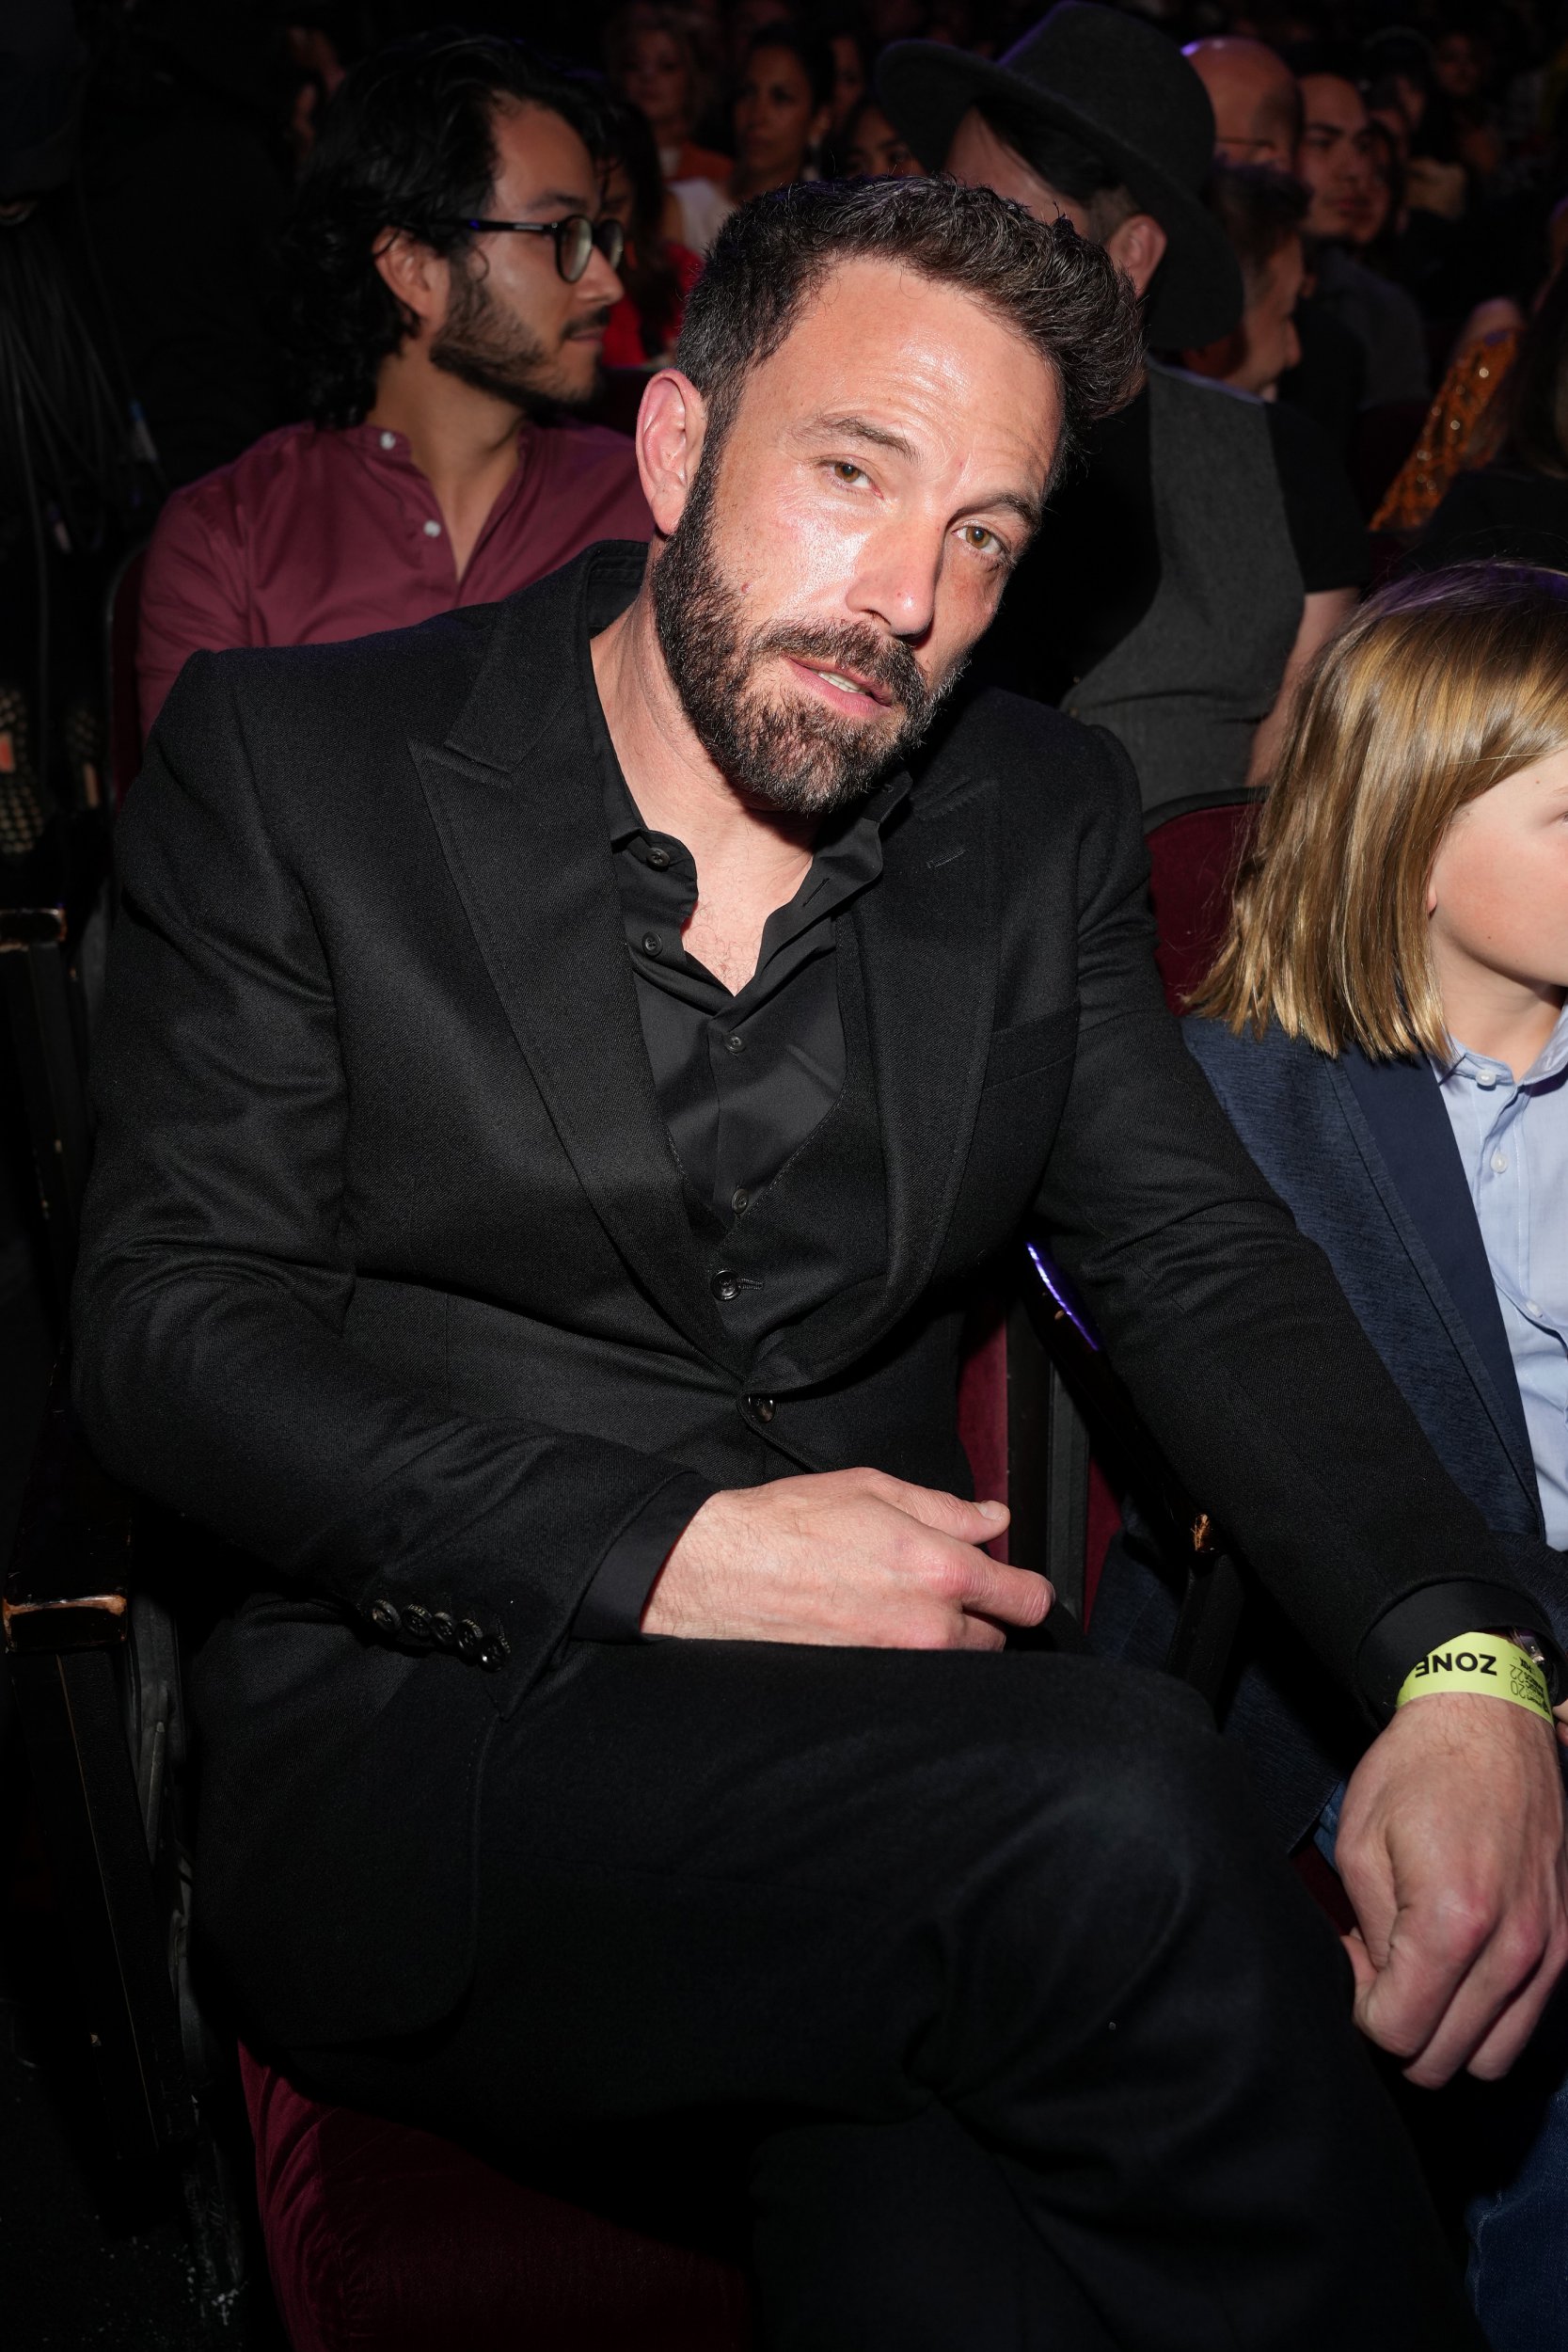 Ben Affleck at the iHeartRadio Music Awards